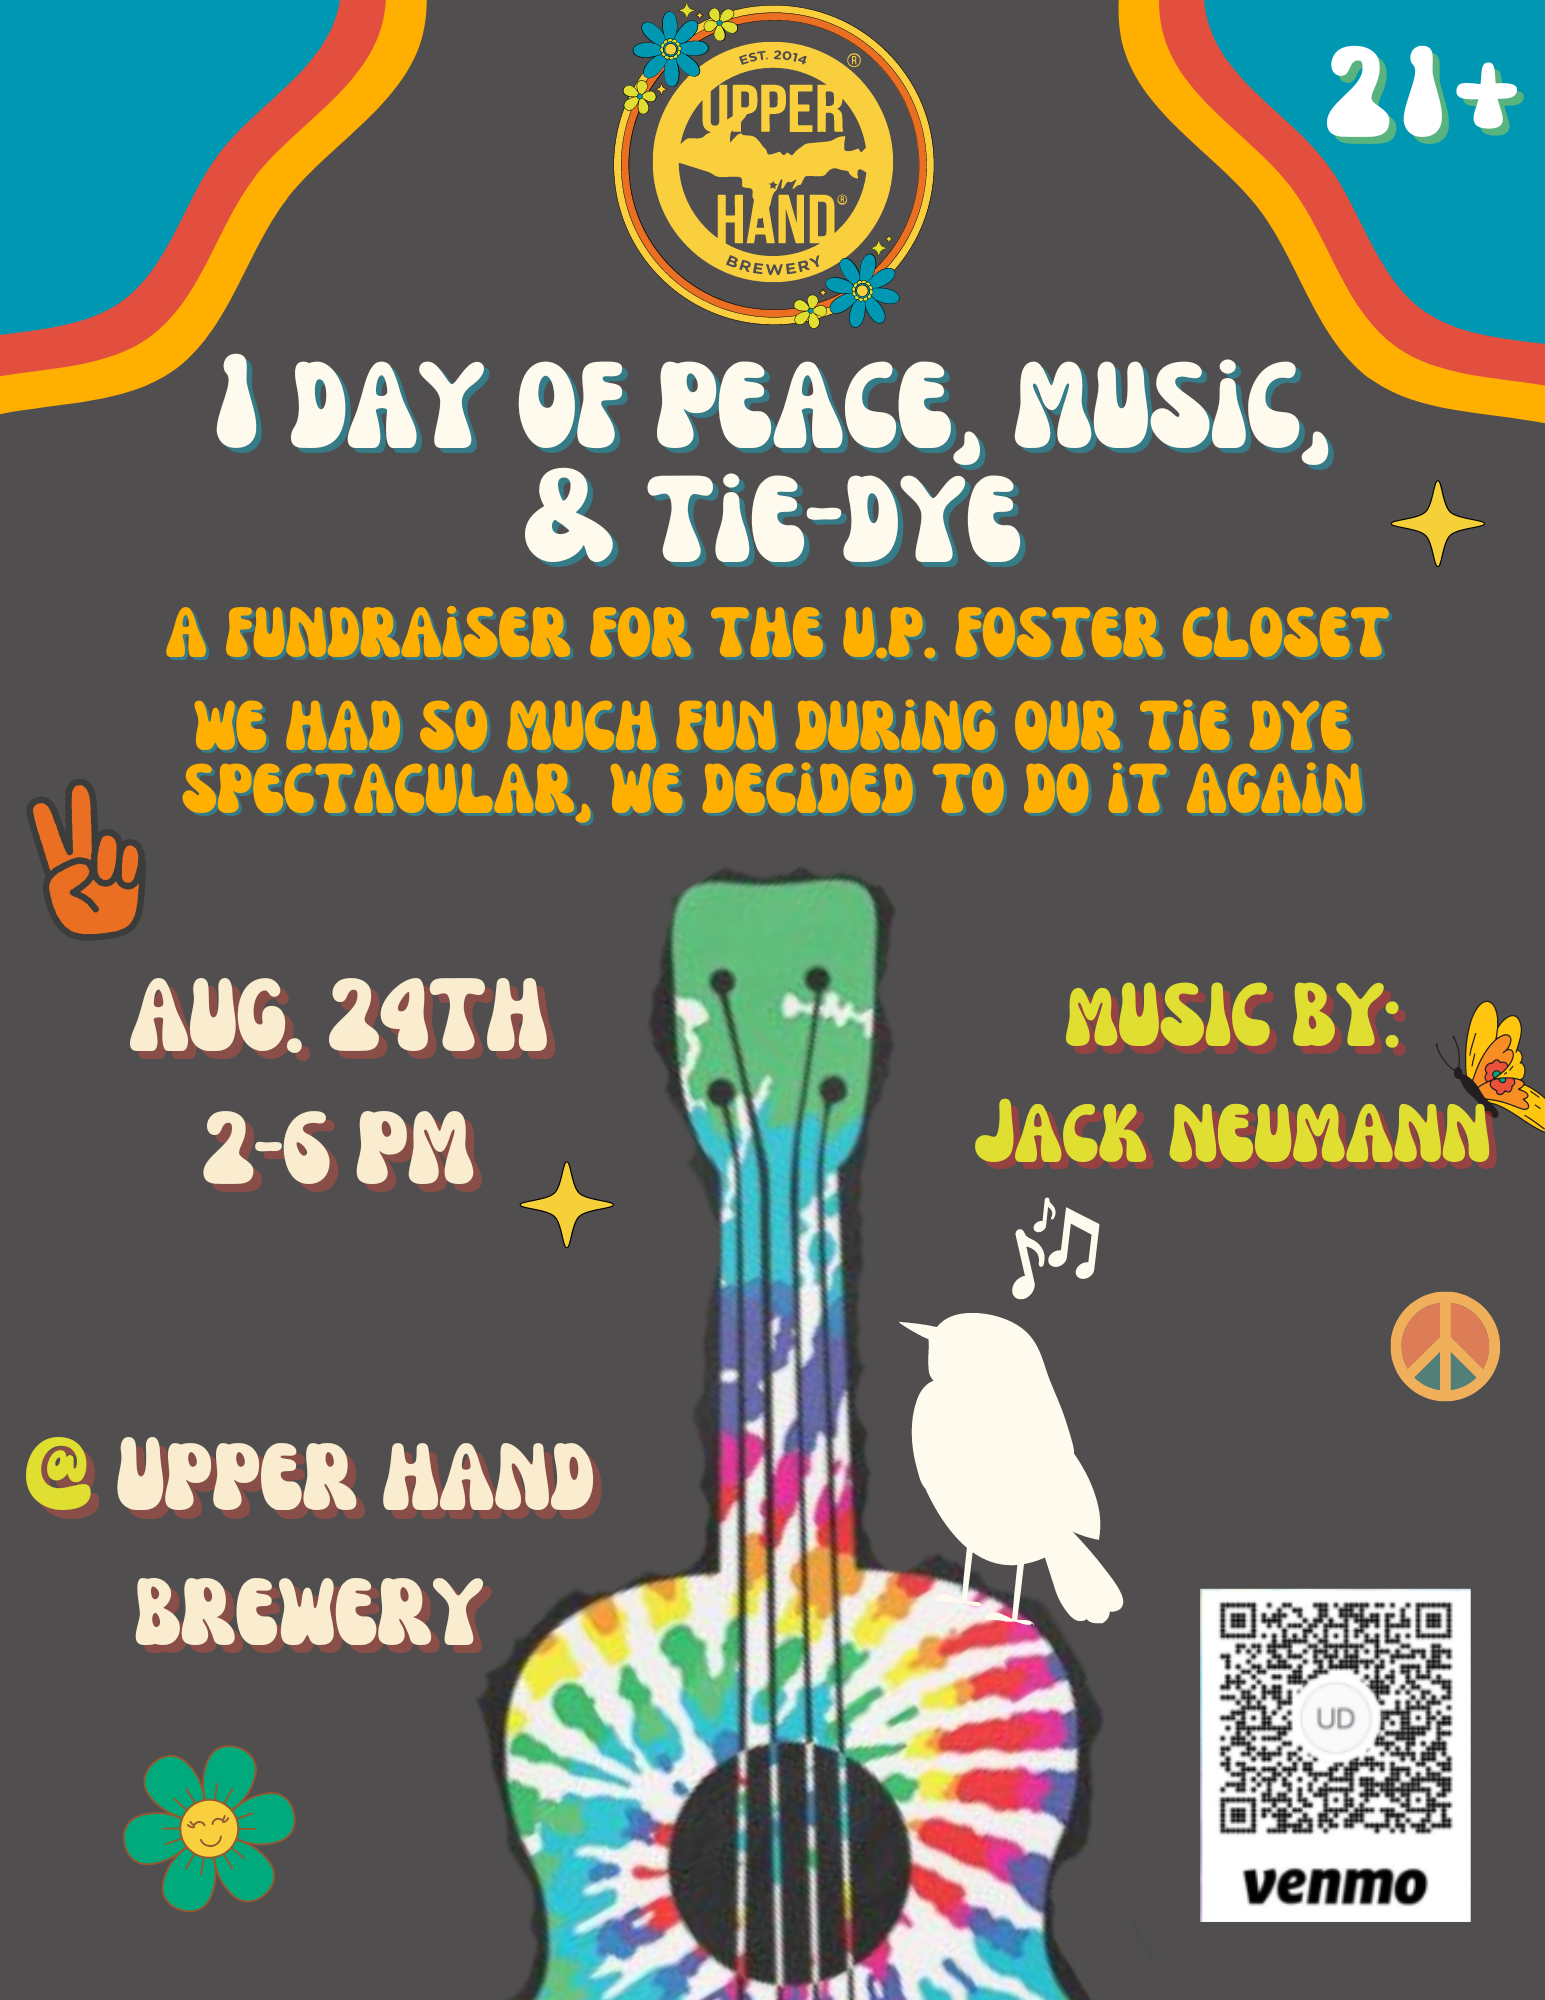 1 Day of Peace, Music and Tie Dye, August 24th